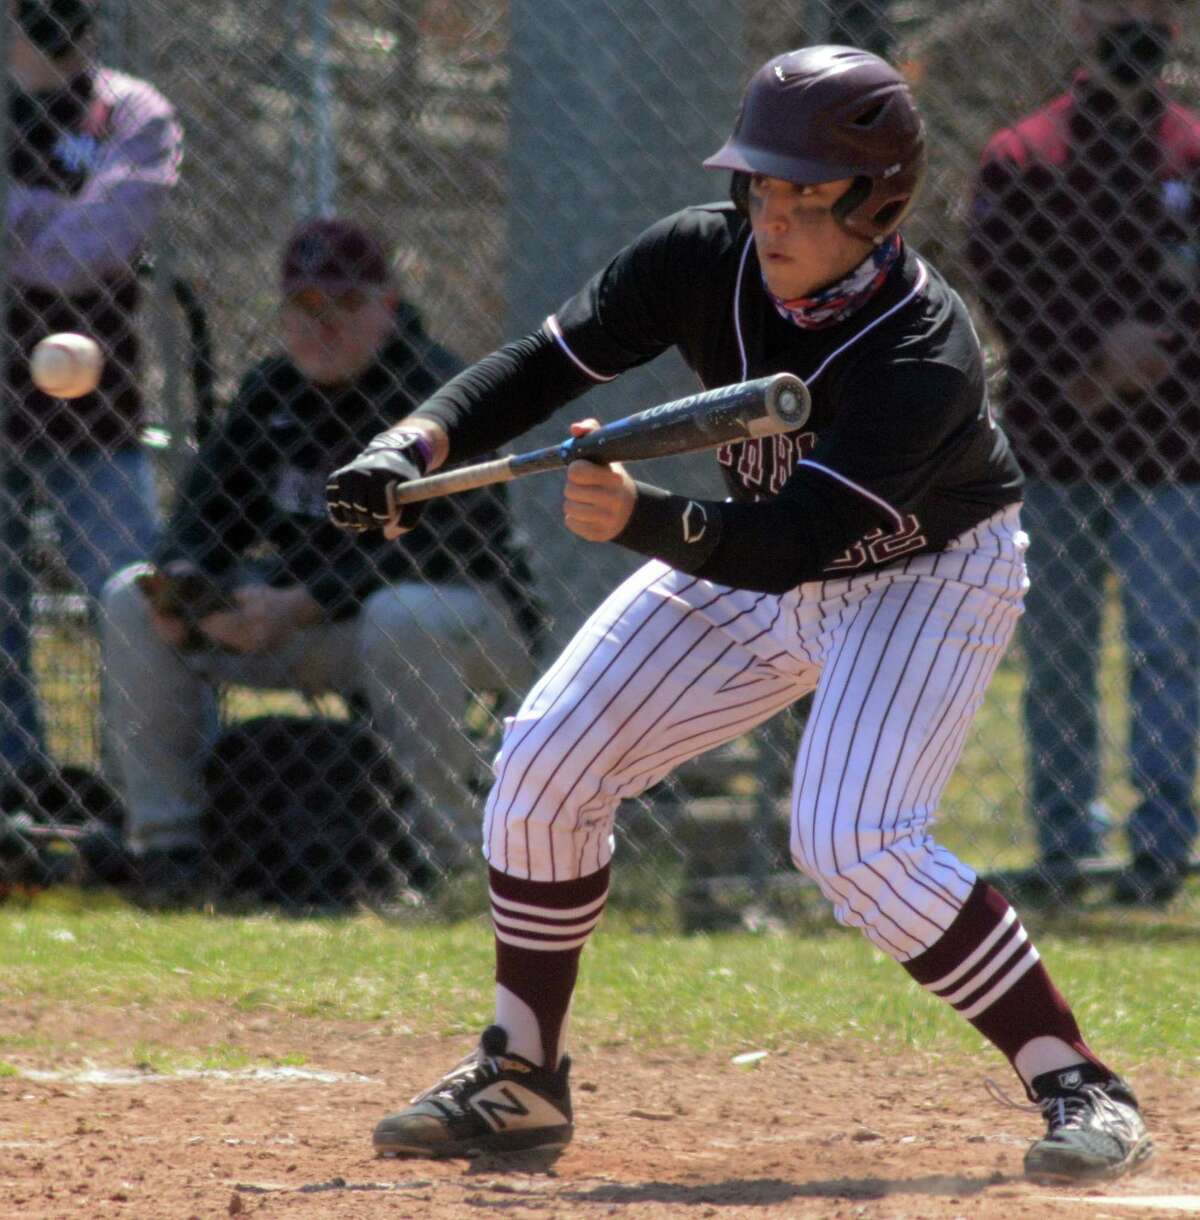 North Haven’s Anthony Acampora bunts against Guilford. High School baseball teams as bunting less and less with men on base, instead hoping for an extra-base hit to bring runners home.